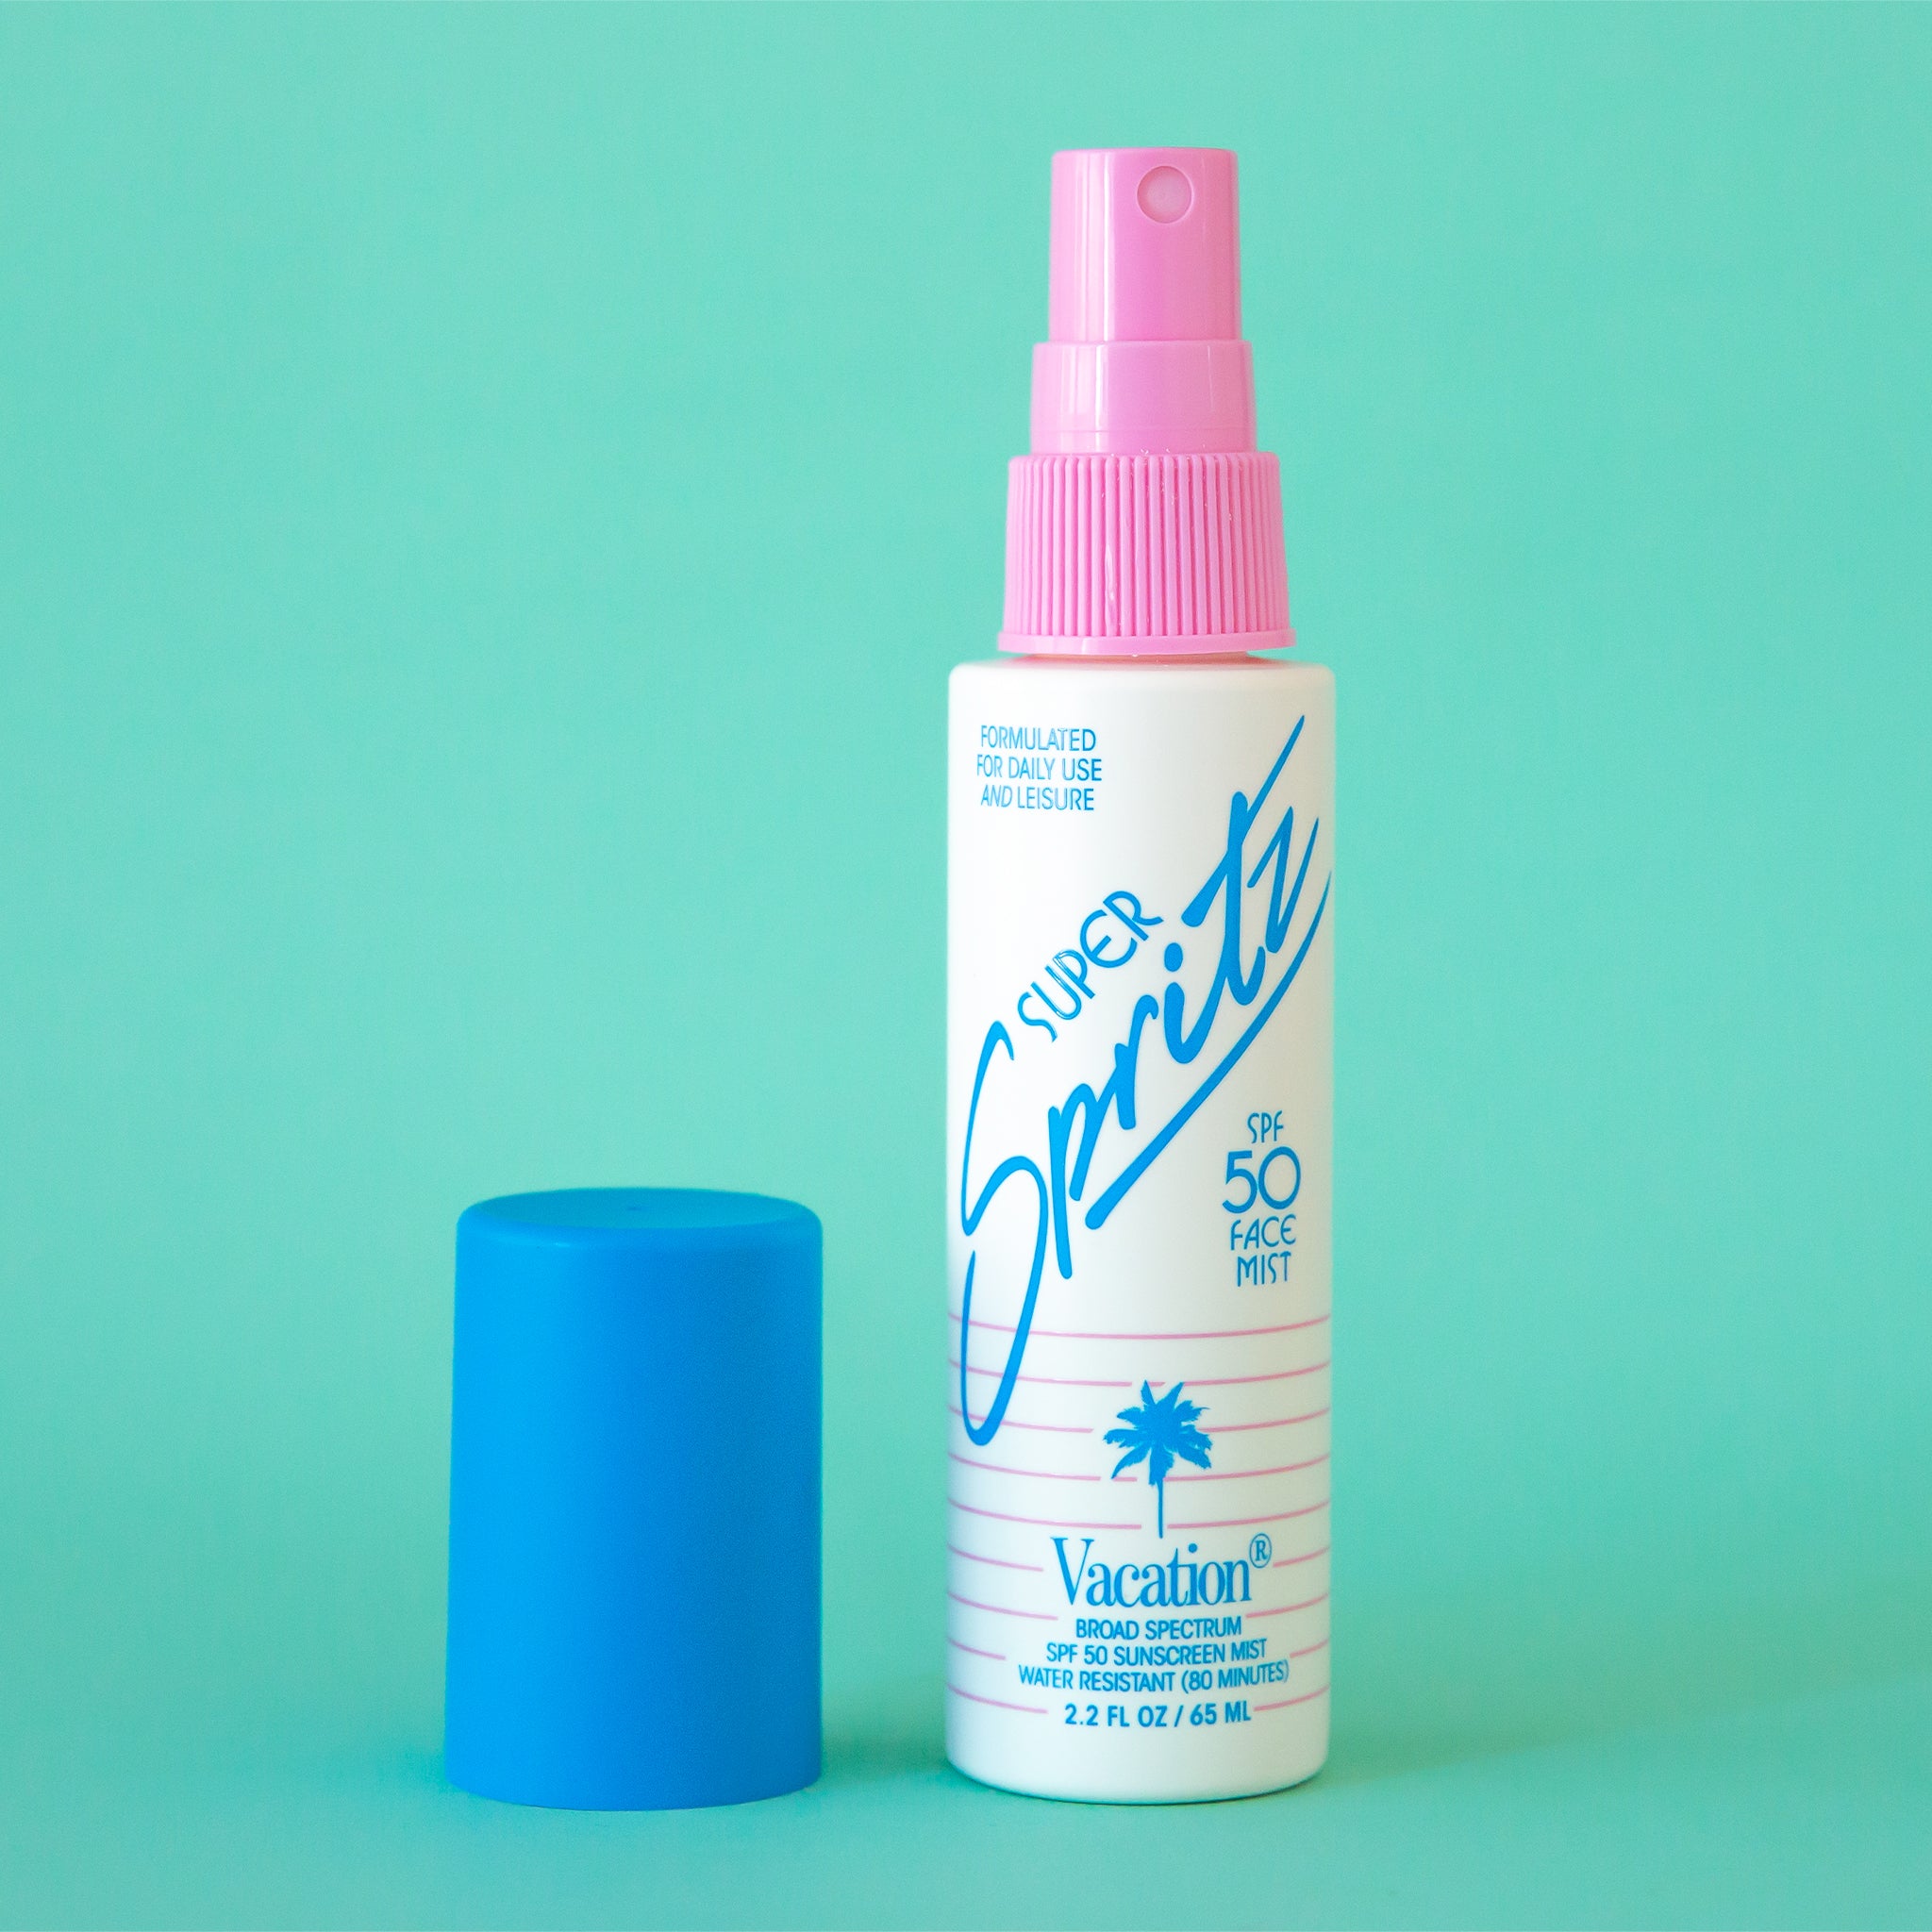 On a blue background is a spray bottle of facial mist with a white bottle, pink spray and blue cap. The text on the bottle reads, "Super Spritz" in blue letters.